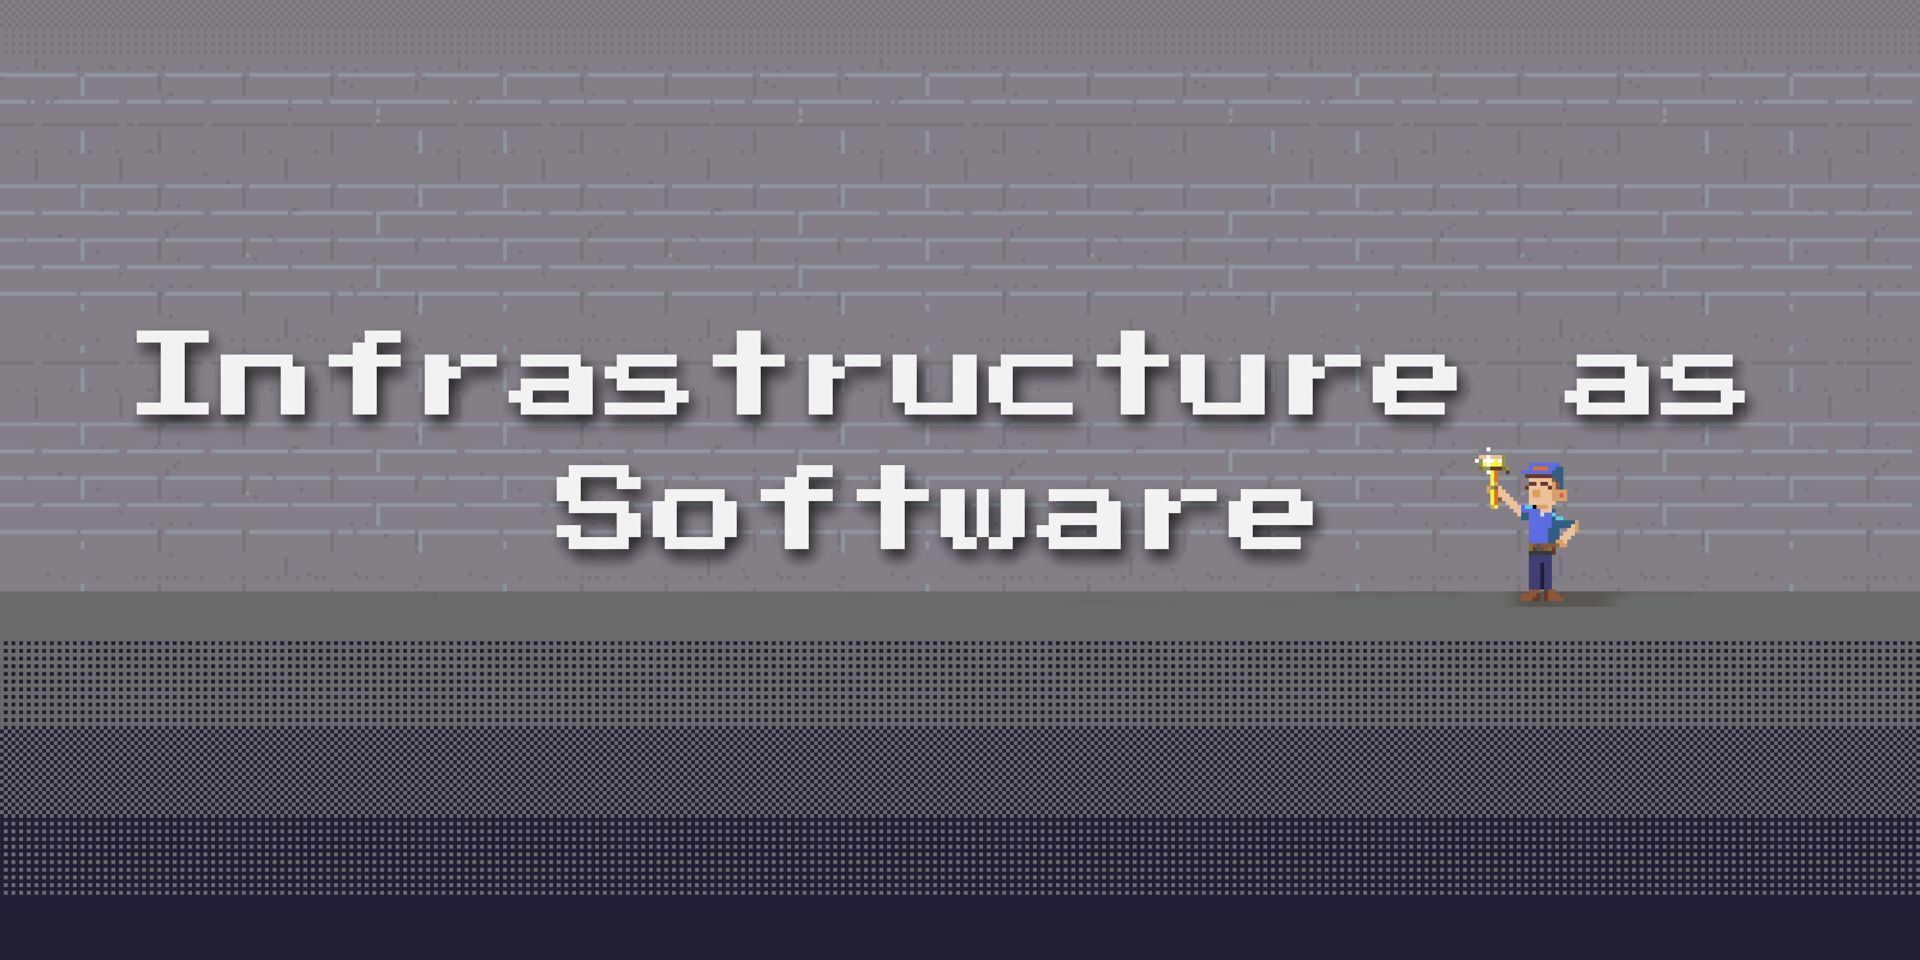 Infrastructure as software